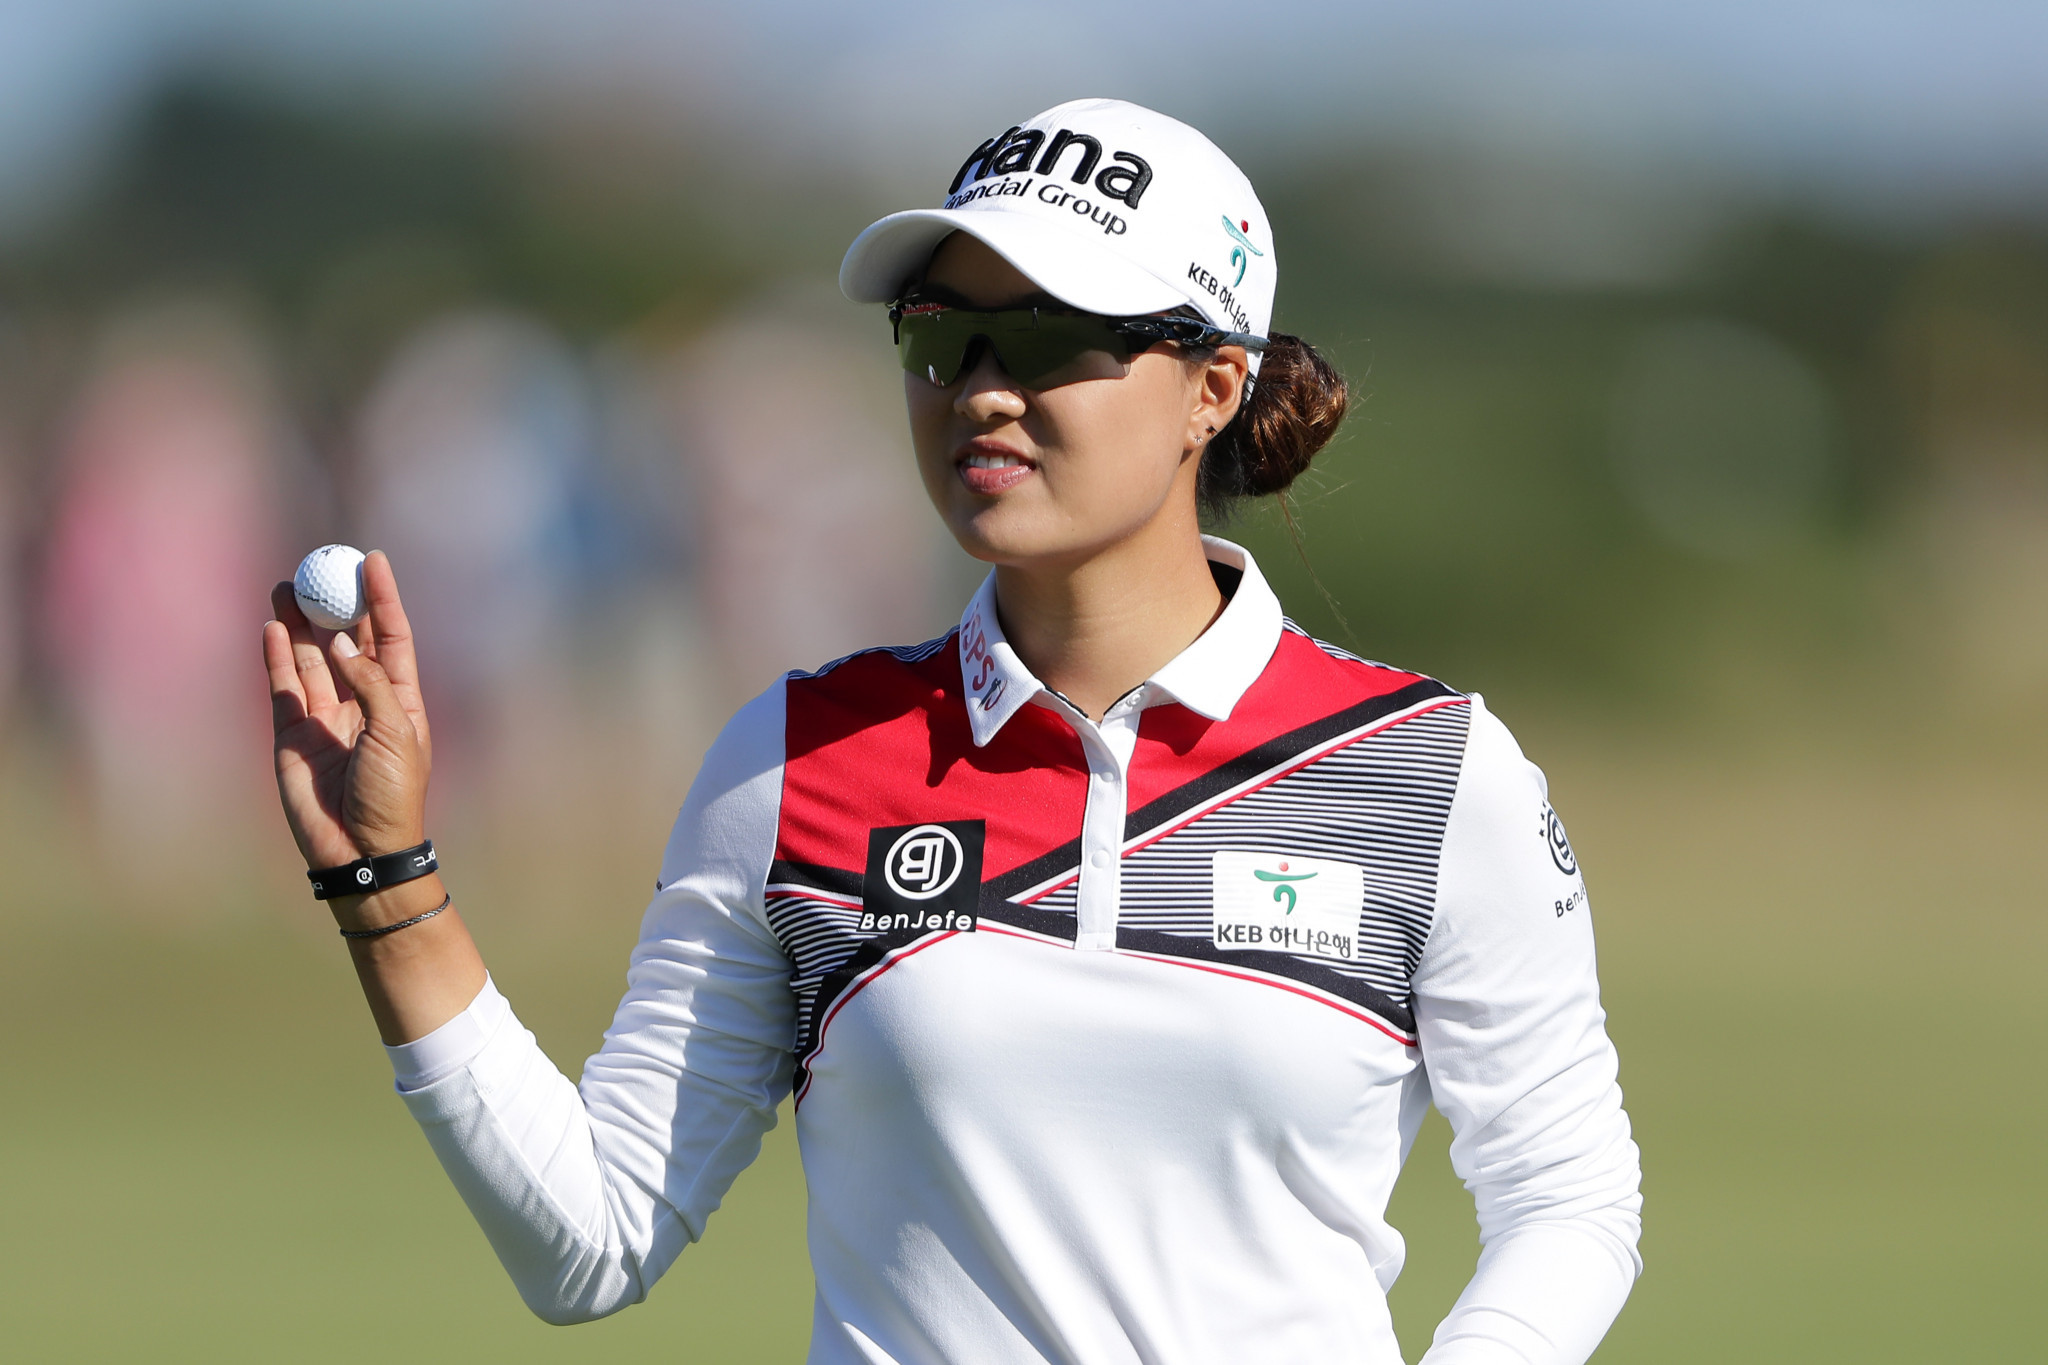 Australia's Lee leads the way after day one of Women's British Open